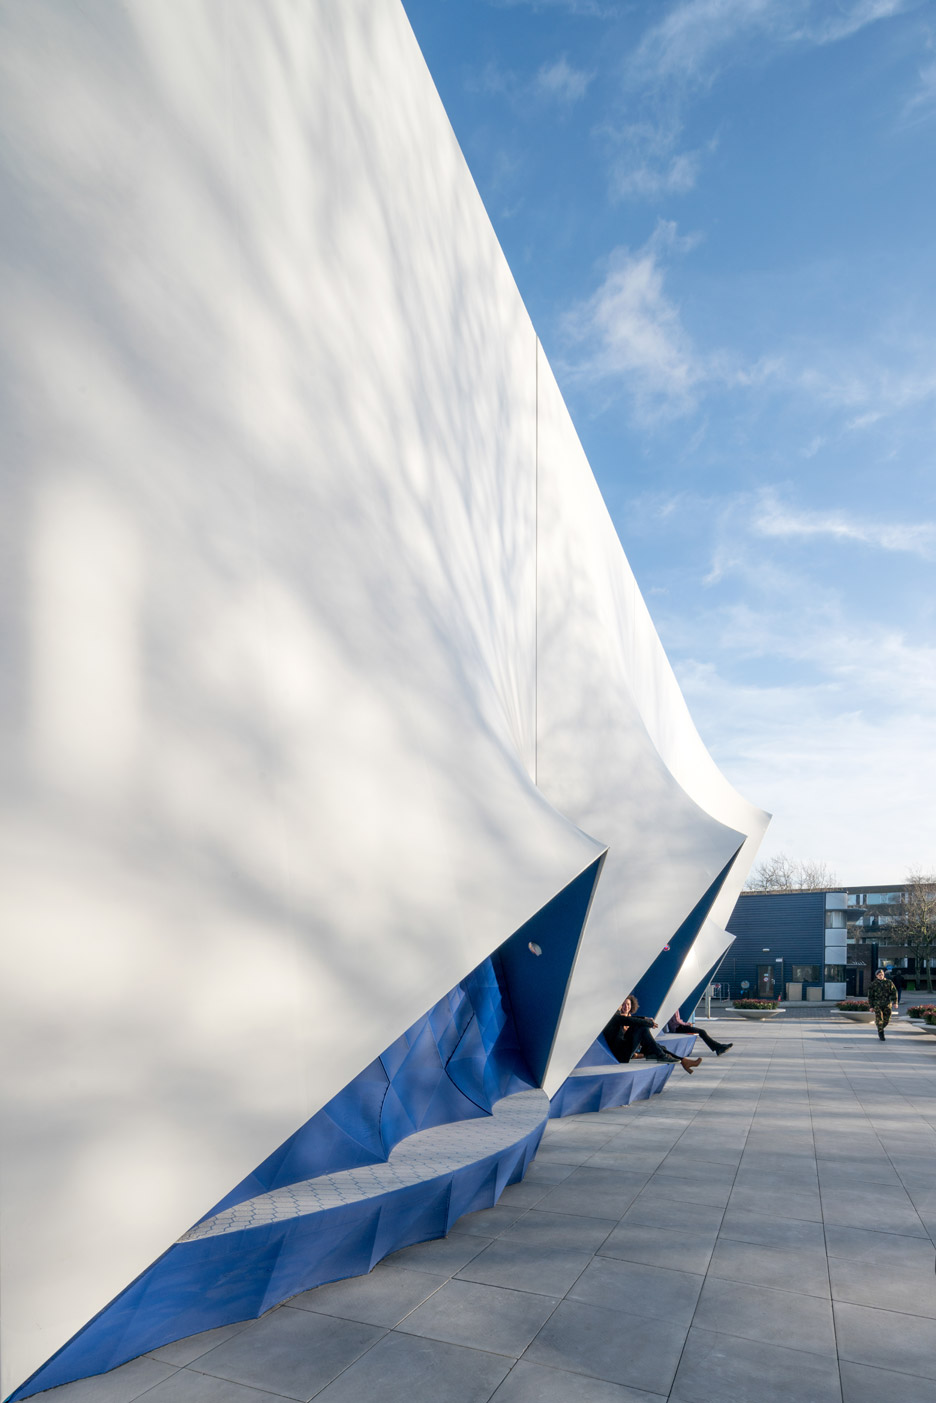 3D printed facade for EU building by Heijmans and DUS Architects